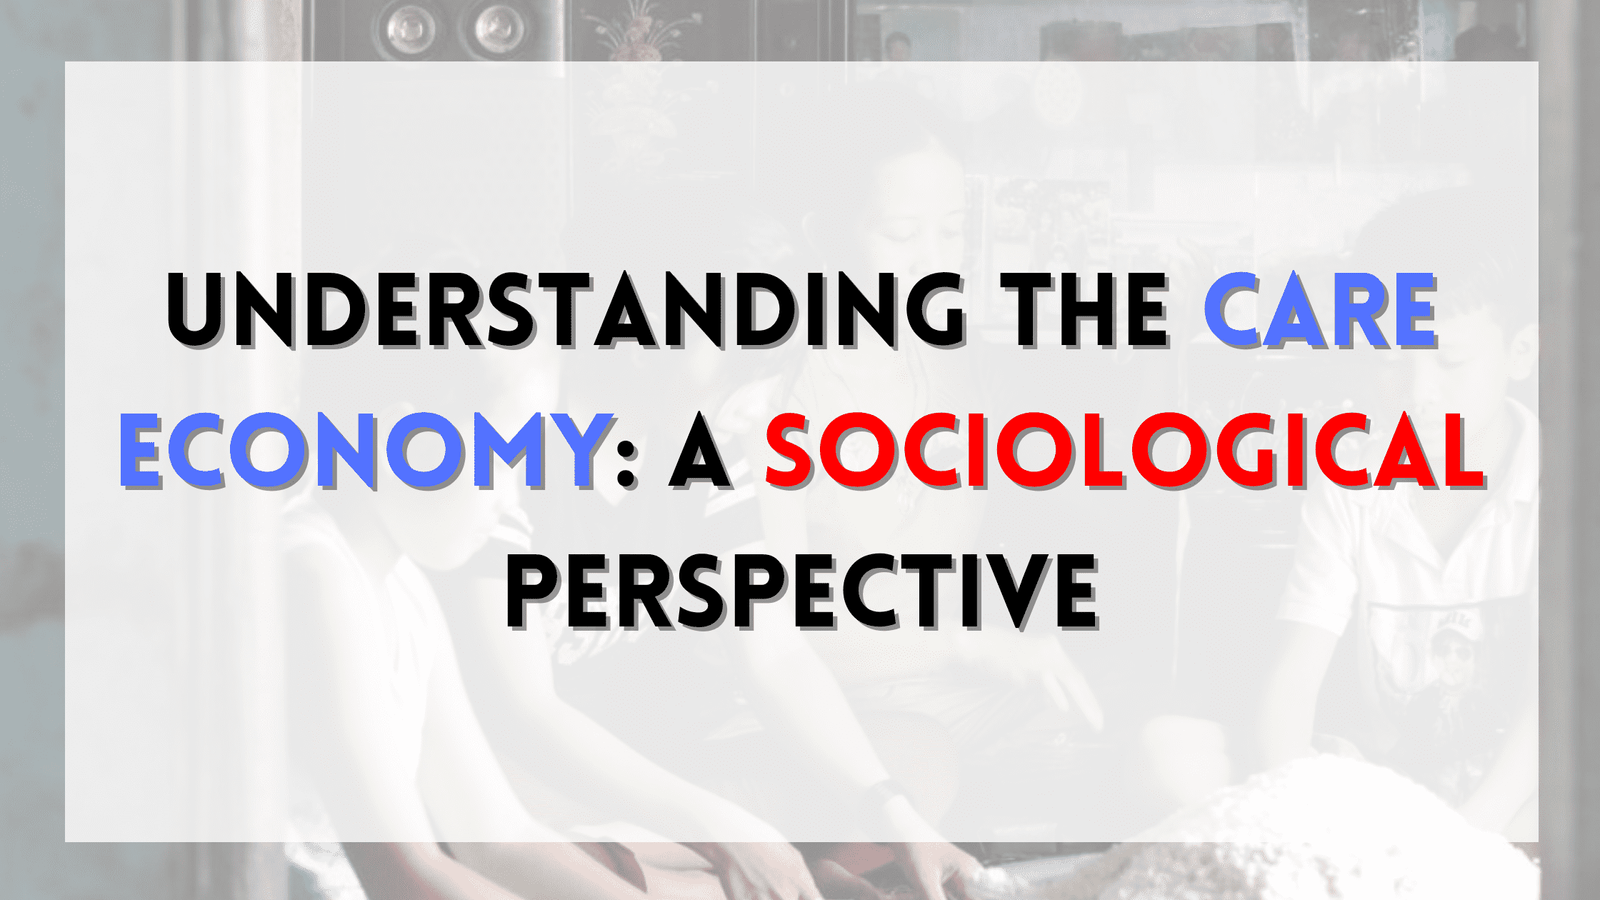 Understanding the Care Economy: A Sociological Perspective